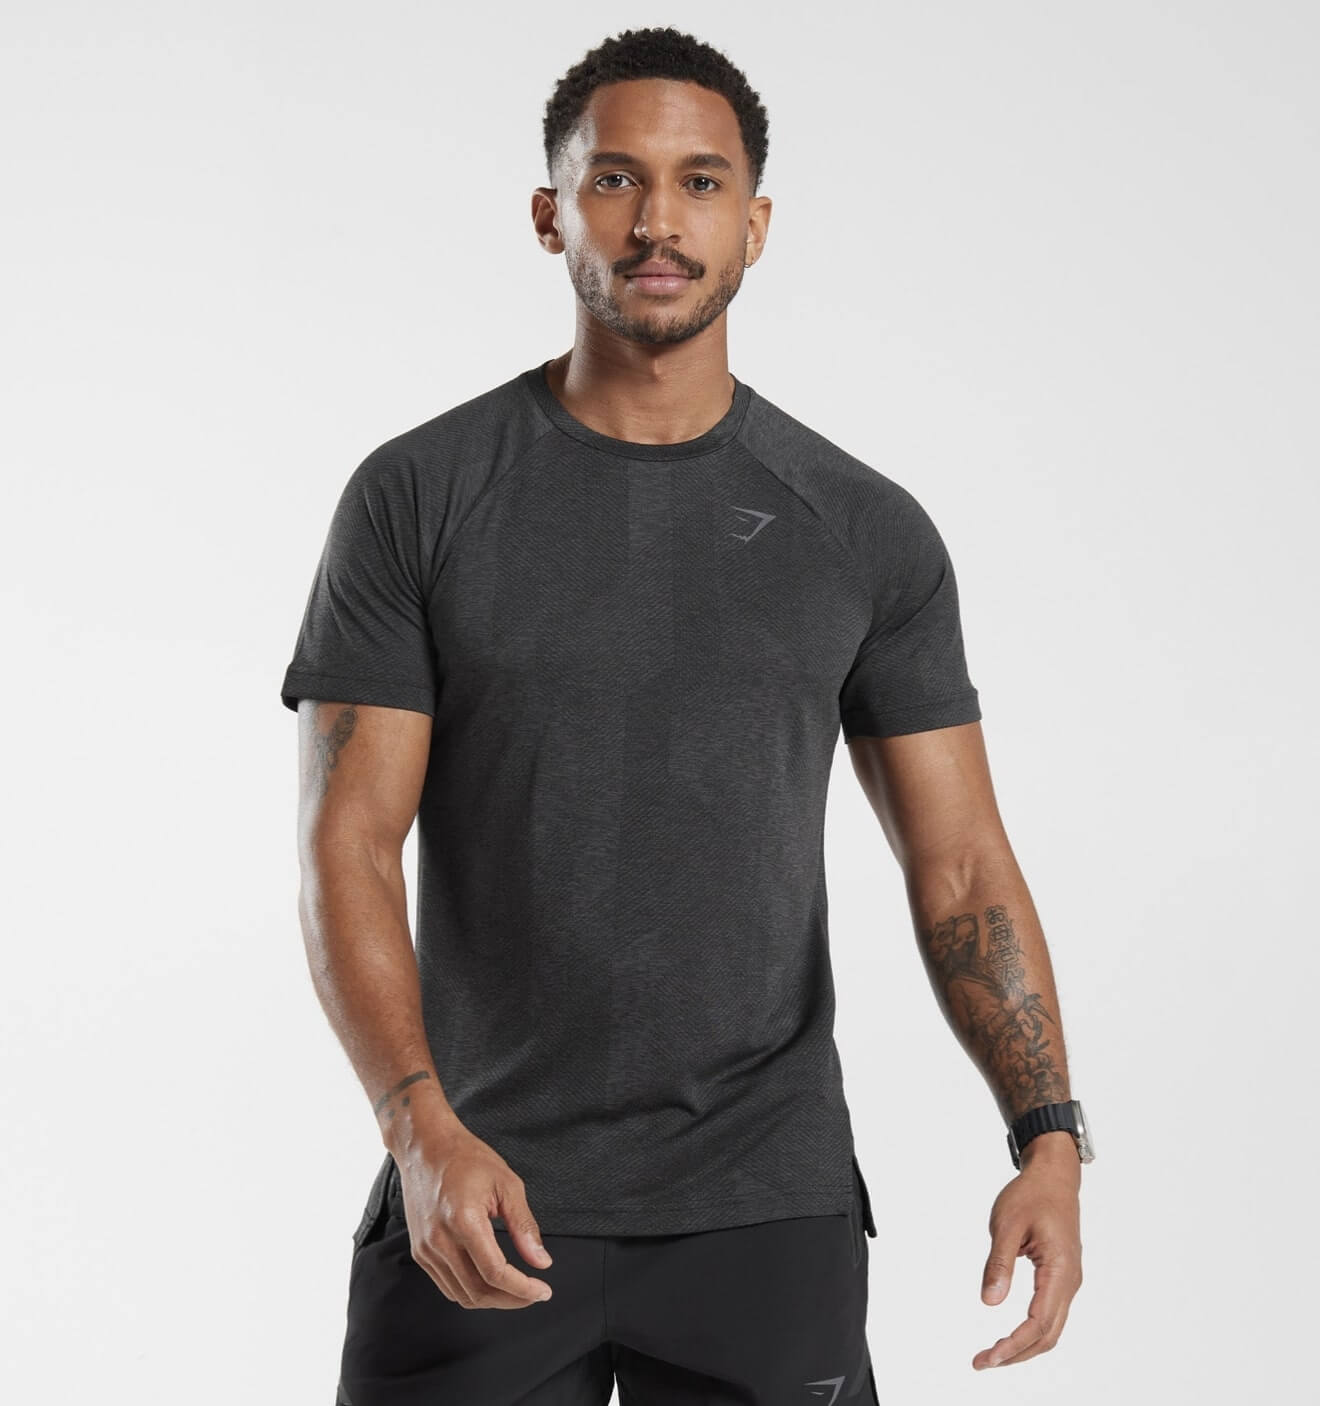 Gymshark Apex T-Shirt, roundup for the best gym shirts